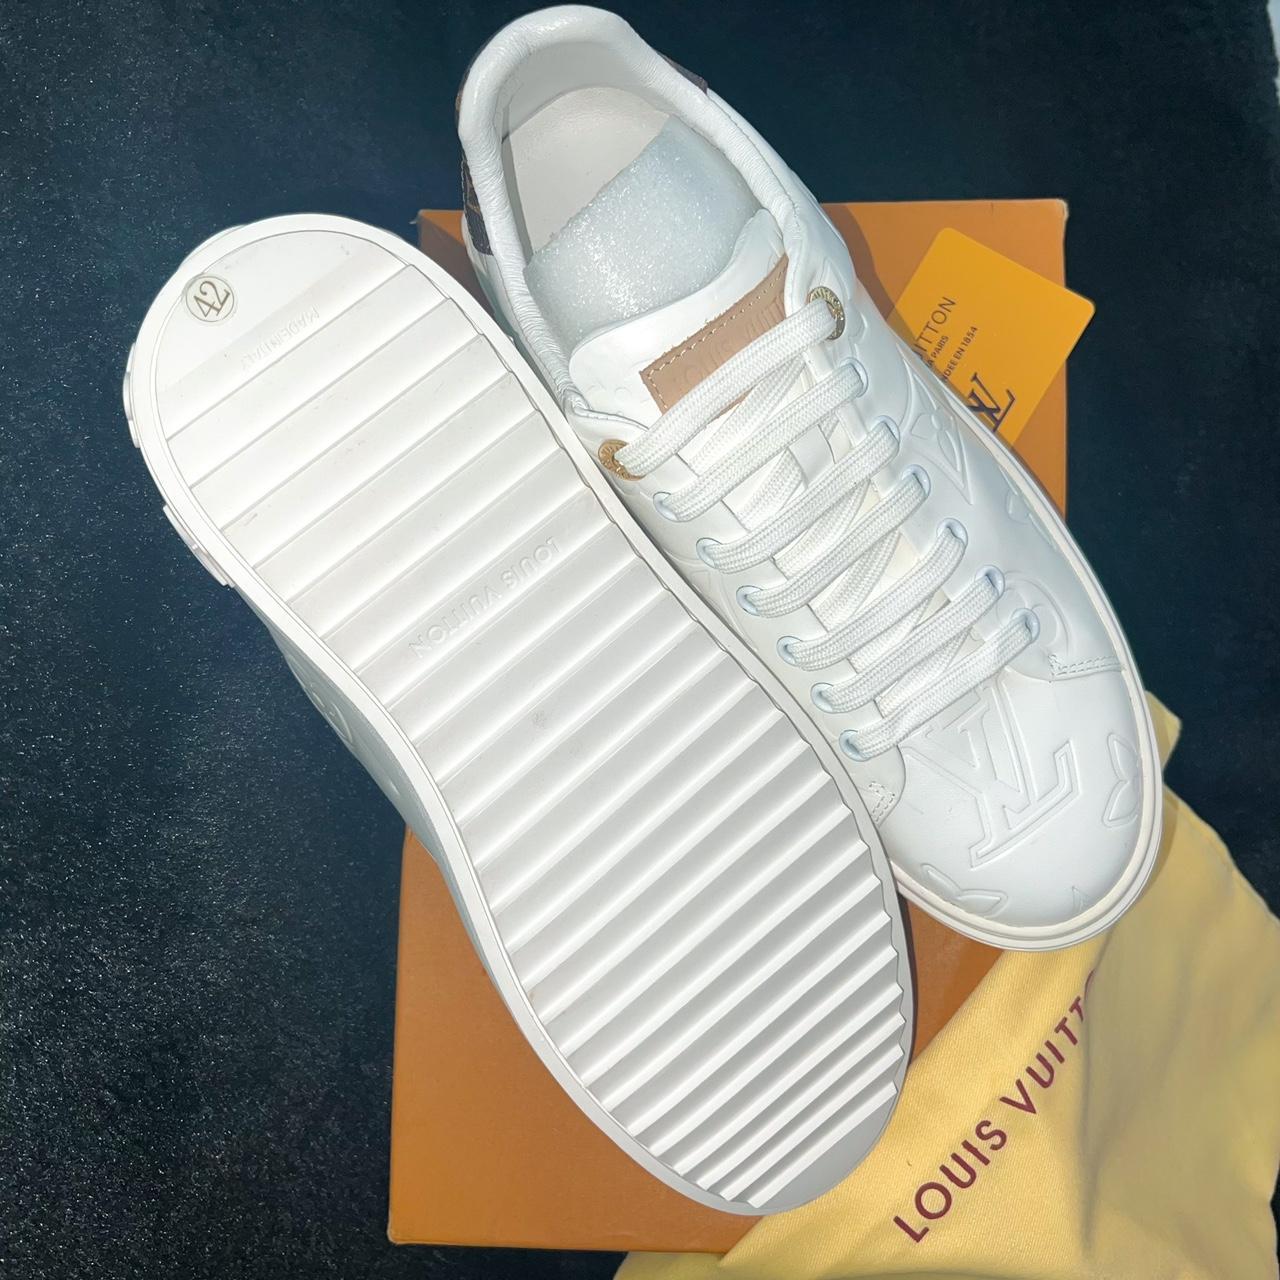 LOUIS VUITTON TIME OUT SNEAKERS BRAND NEW Never - Depop